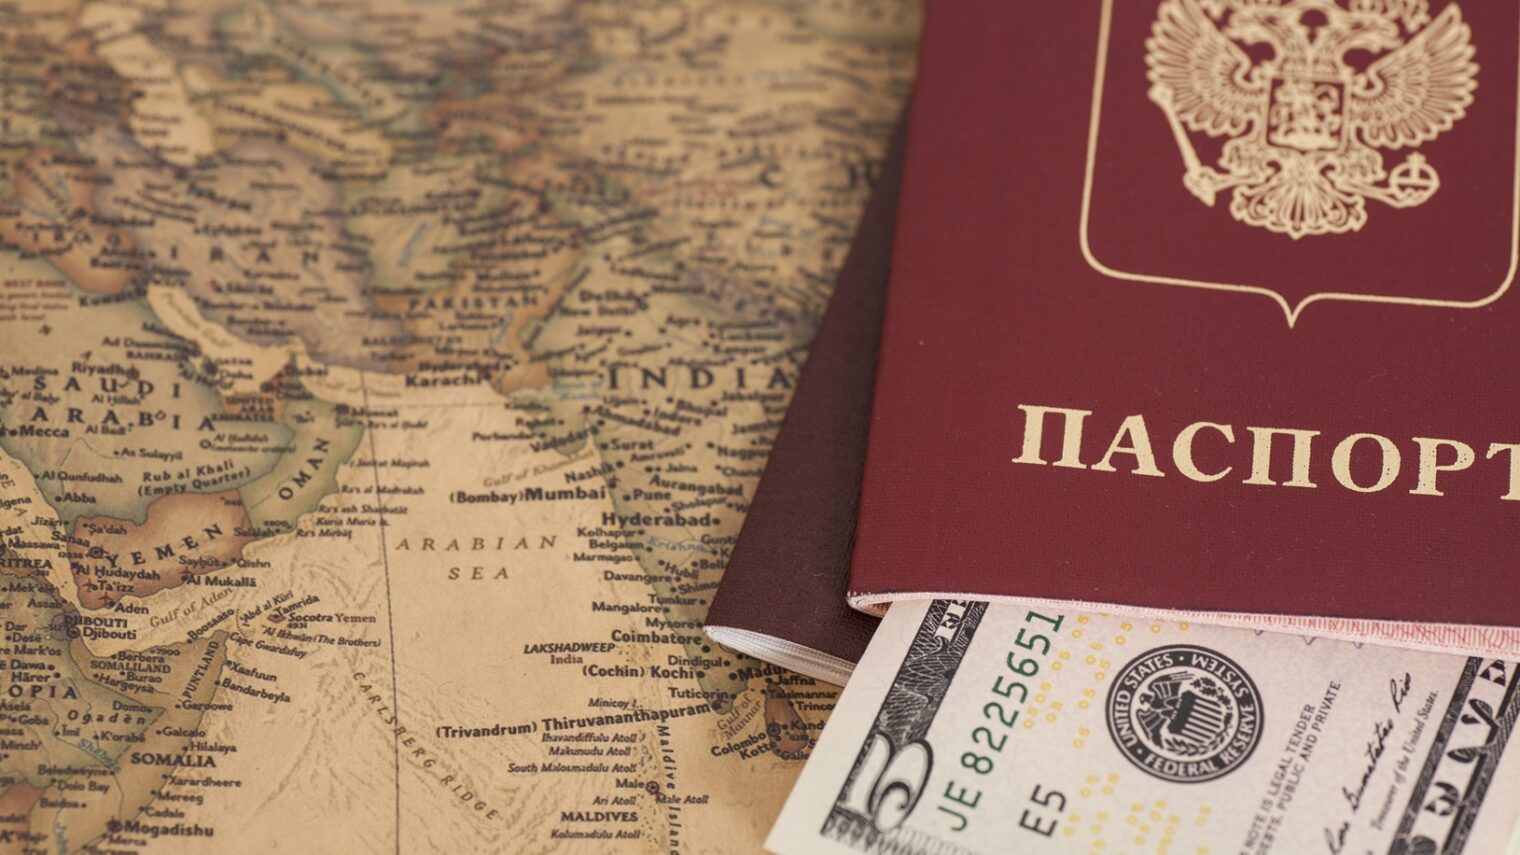 No more worrying that you paid too much for travel bookings. Image via Shutterstock.com